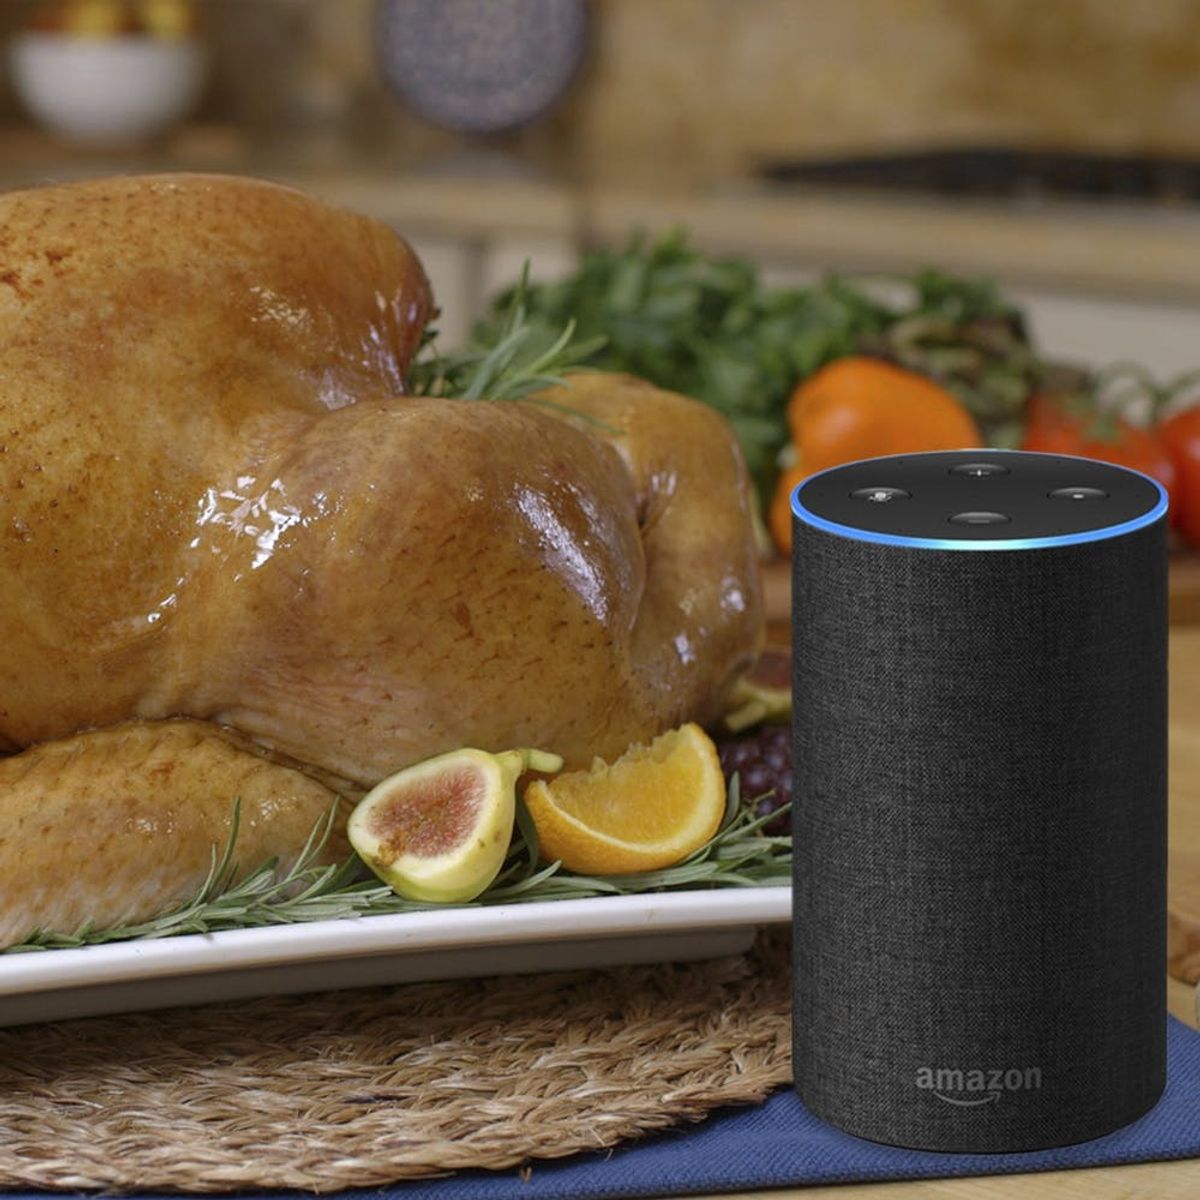 Call the Turkey Talk-Line on Amazon Alexa for All Your Turkey-Cooking Needs